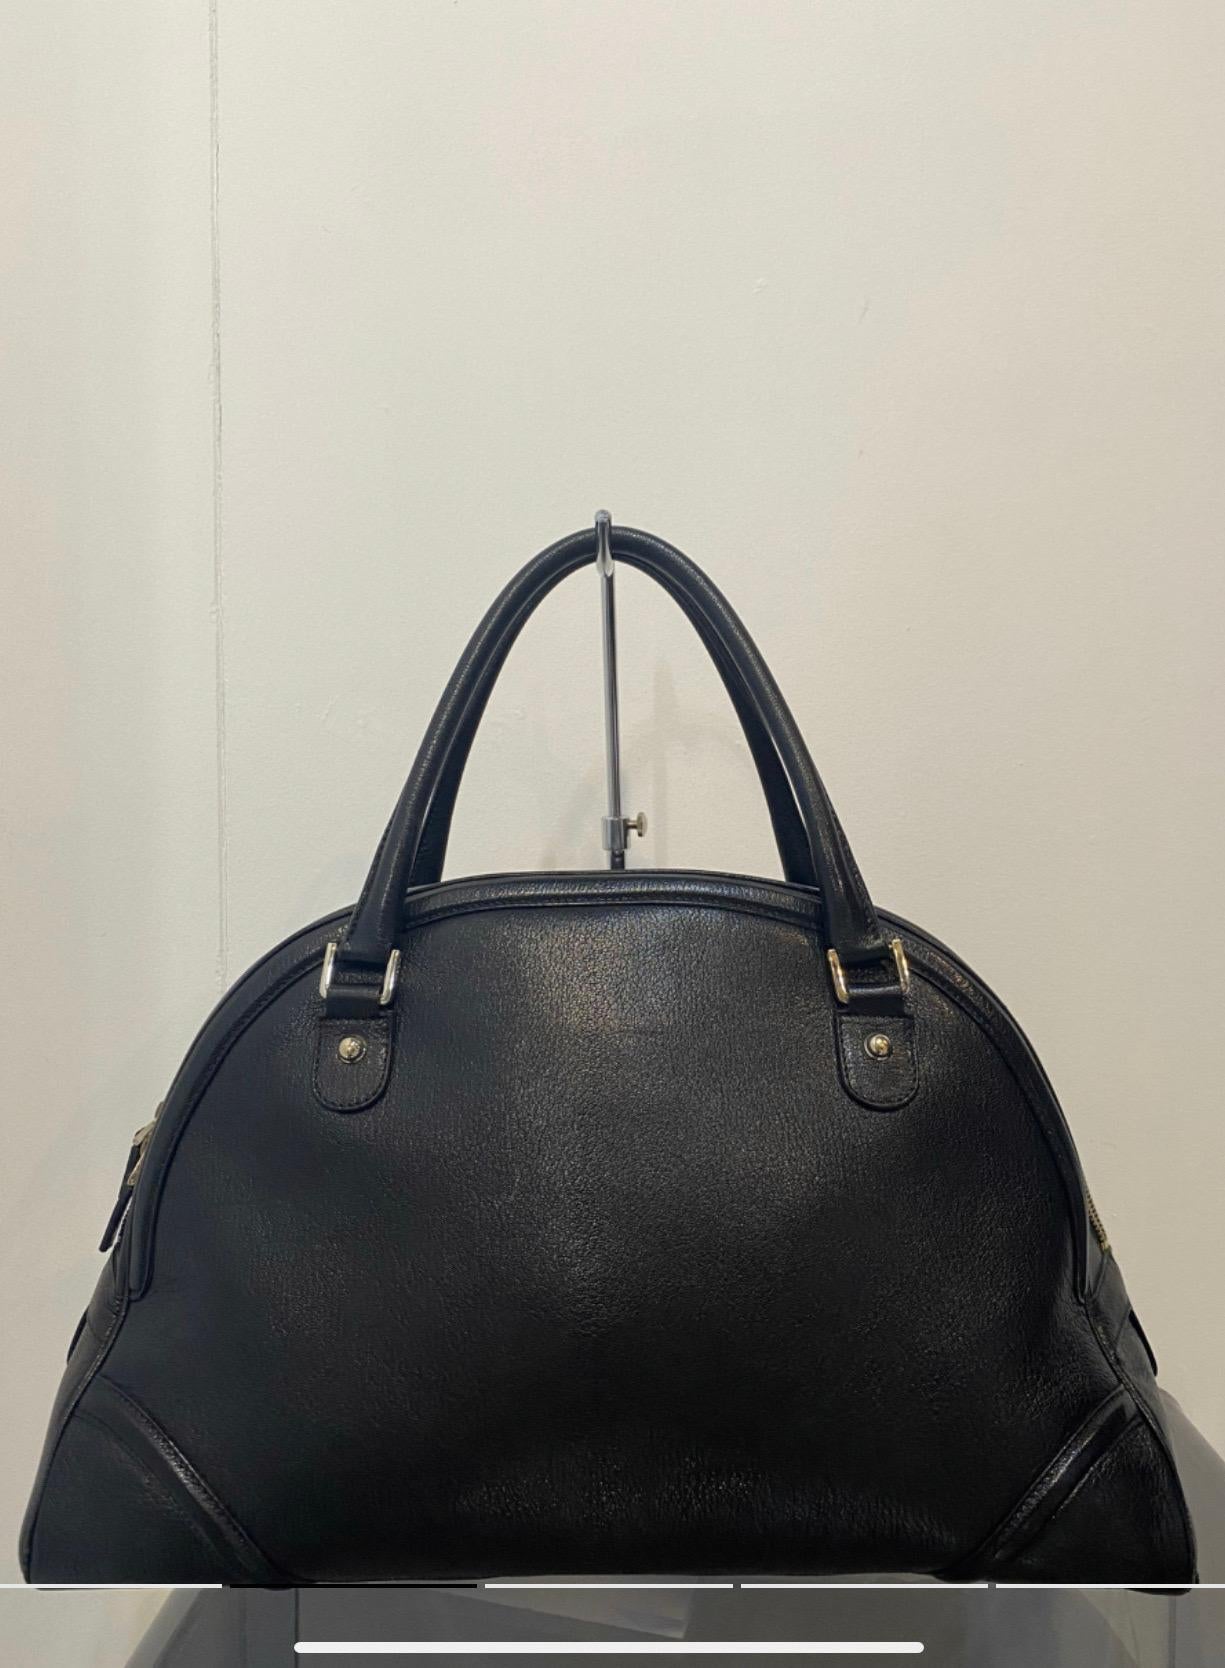 Gucci Blondie Black leather bag In Good Condition For Sale In Carnate, IT